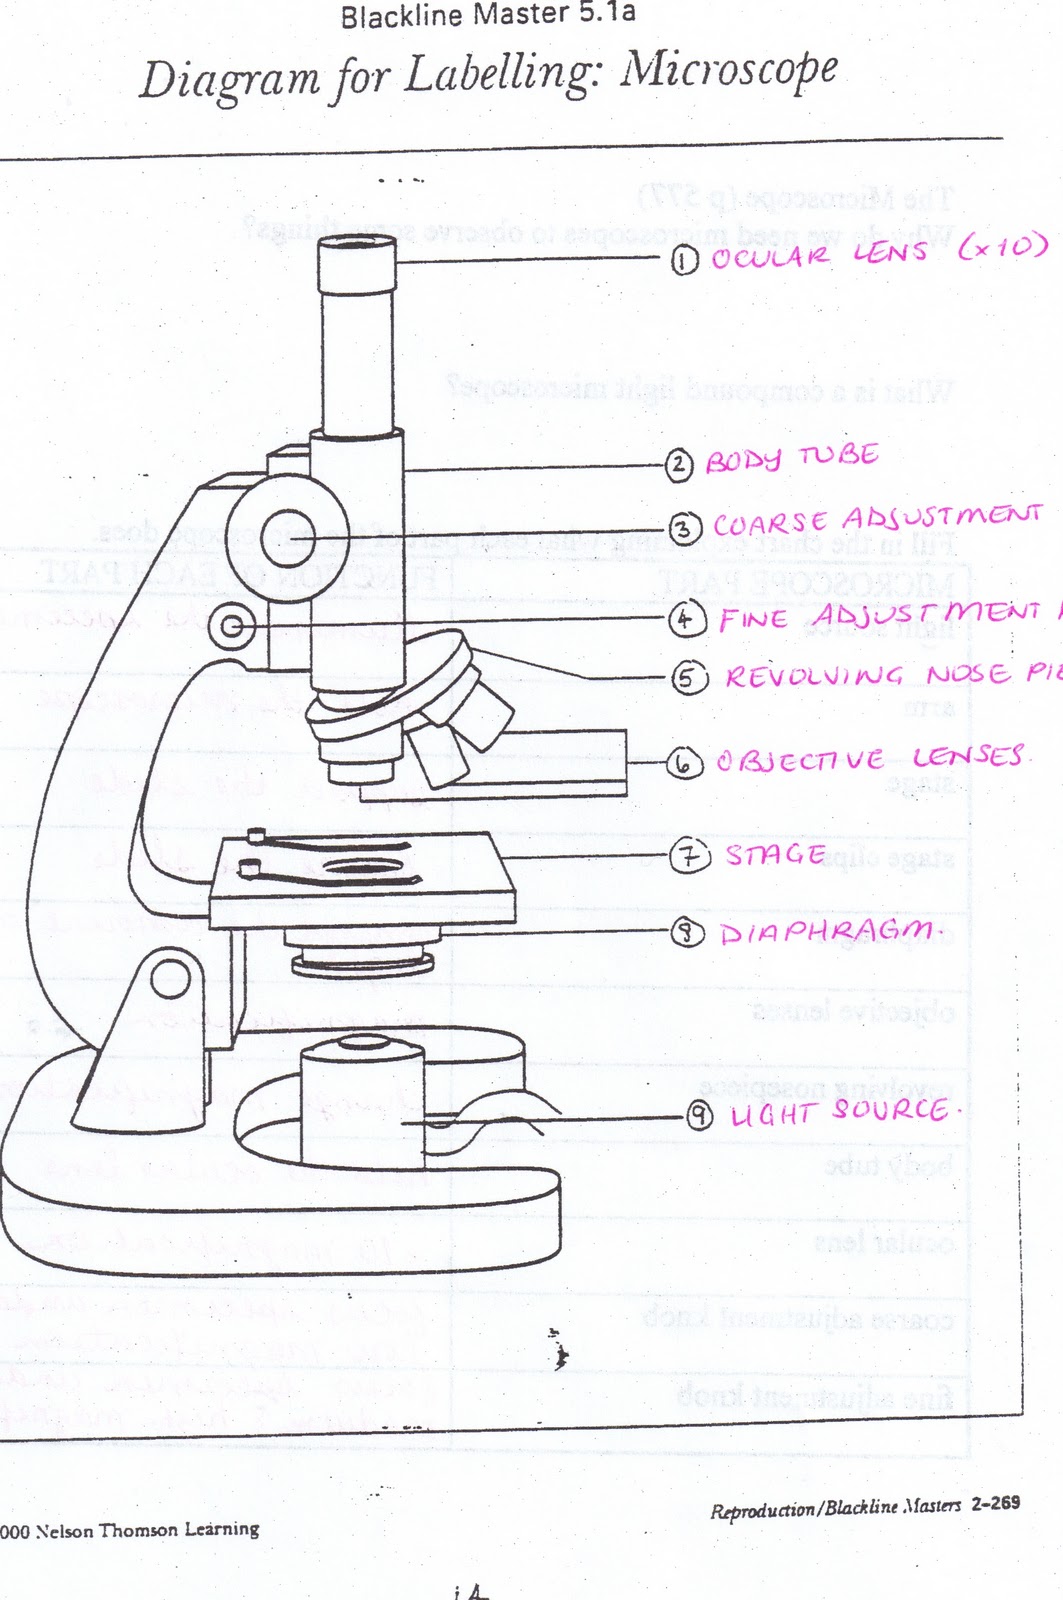 How to draw Compound Microscope diagram step by step/Microscope labeled  diagram drawing - YouTube